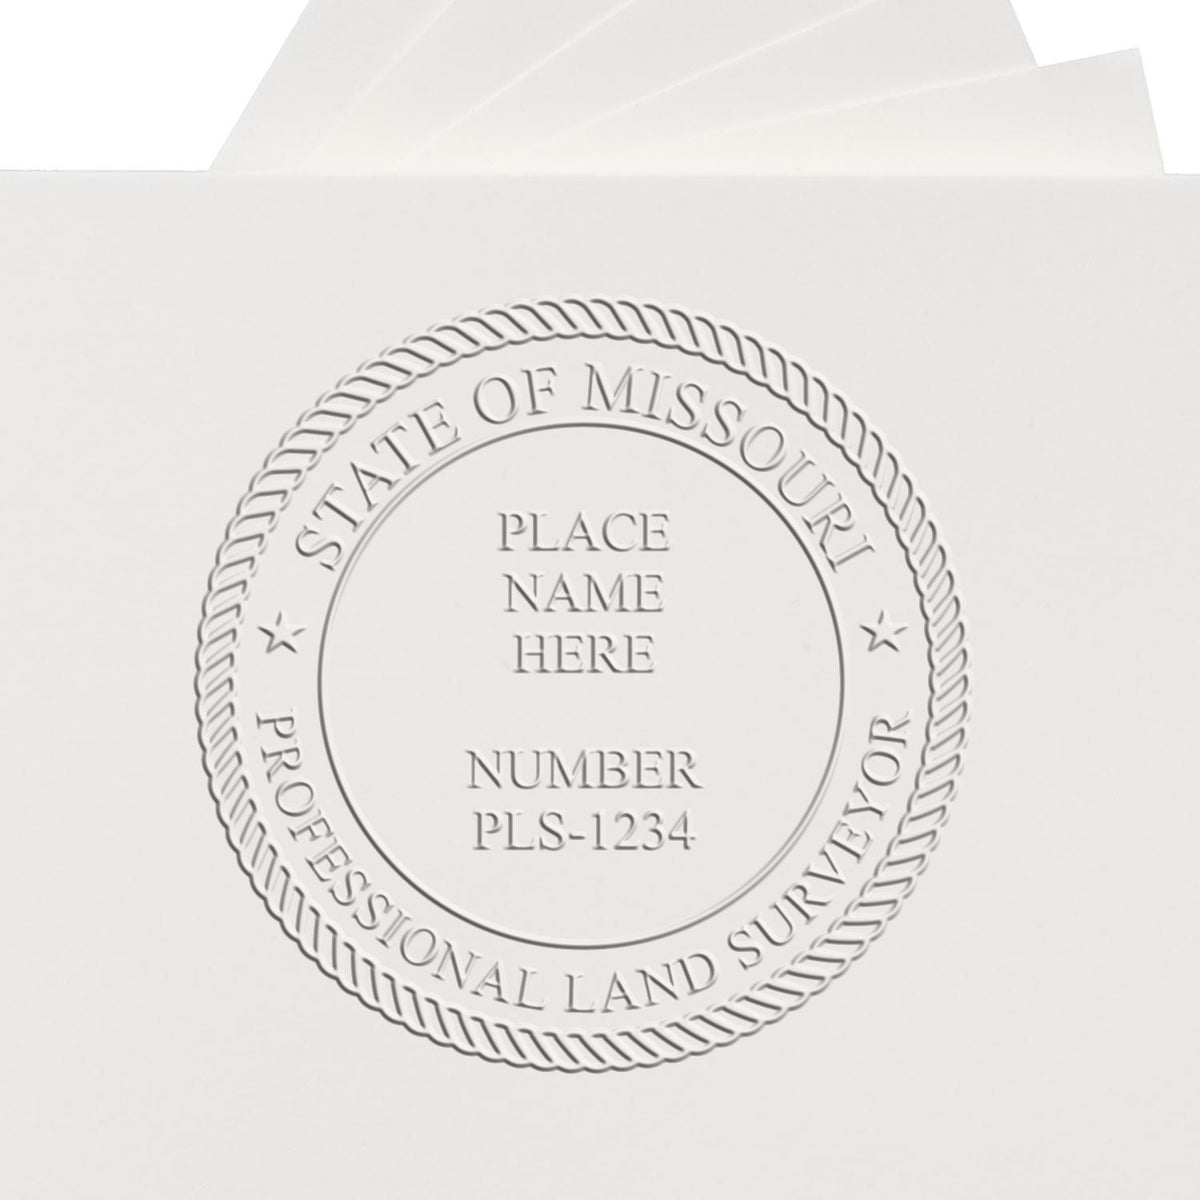 The Gift Missouri Land Surveyor Seal stamp impression comes to life with a crisp, detailed image stamped on paper - showcasing true professional quality.